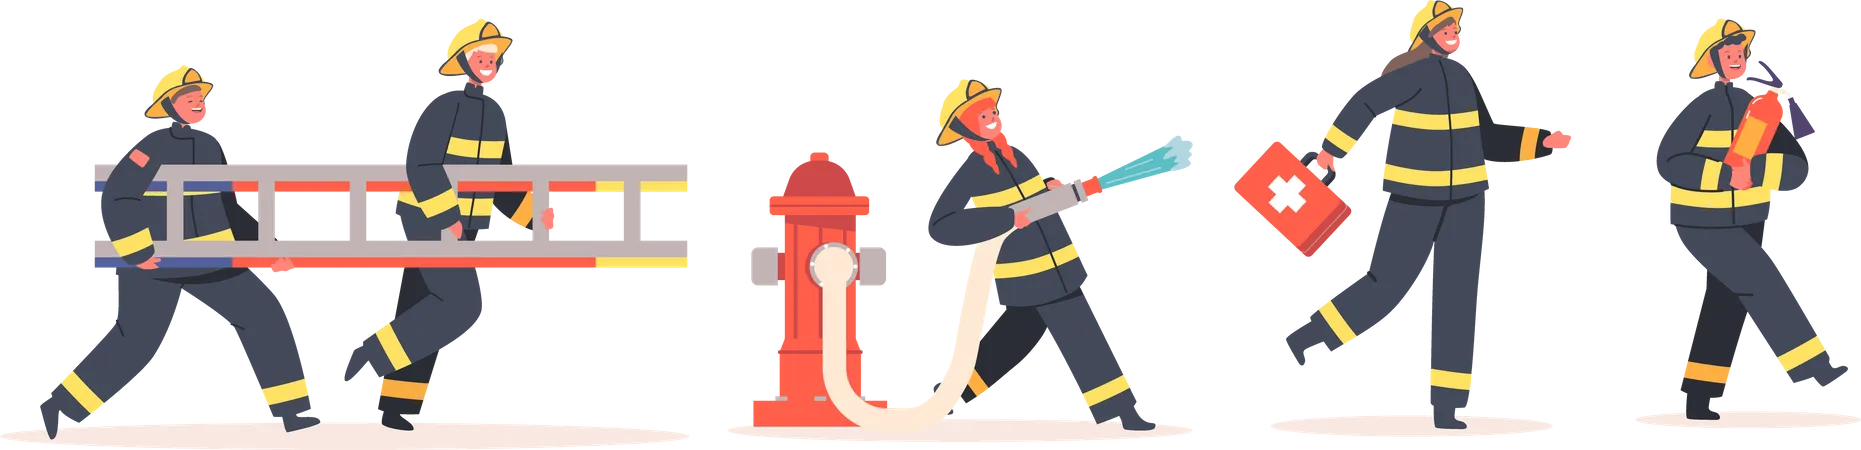 Fire Fighters  Illustration